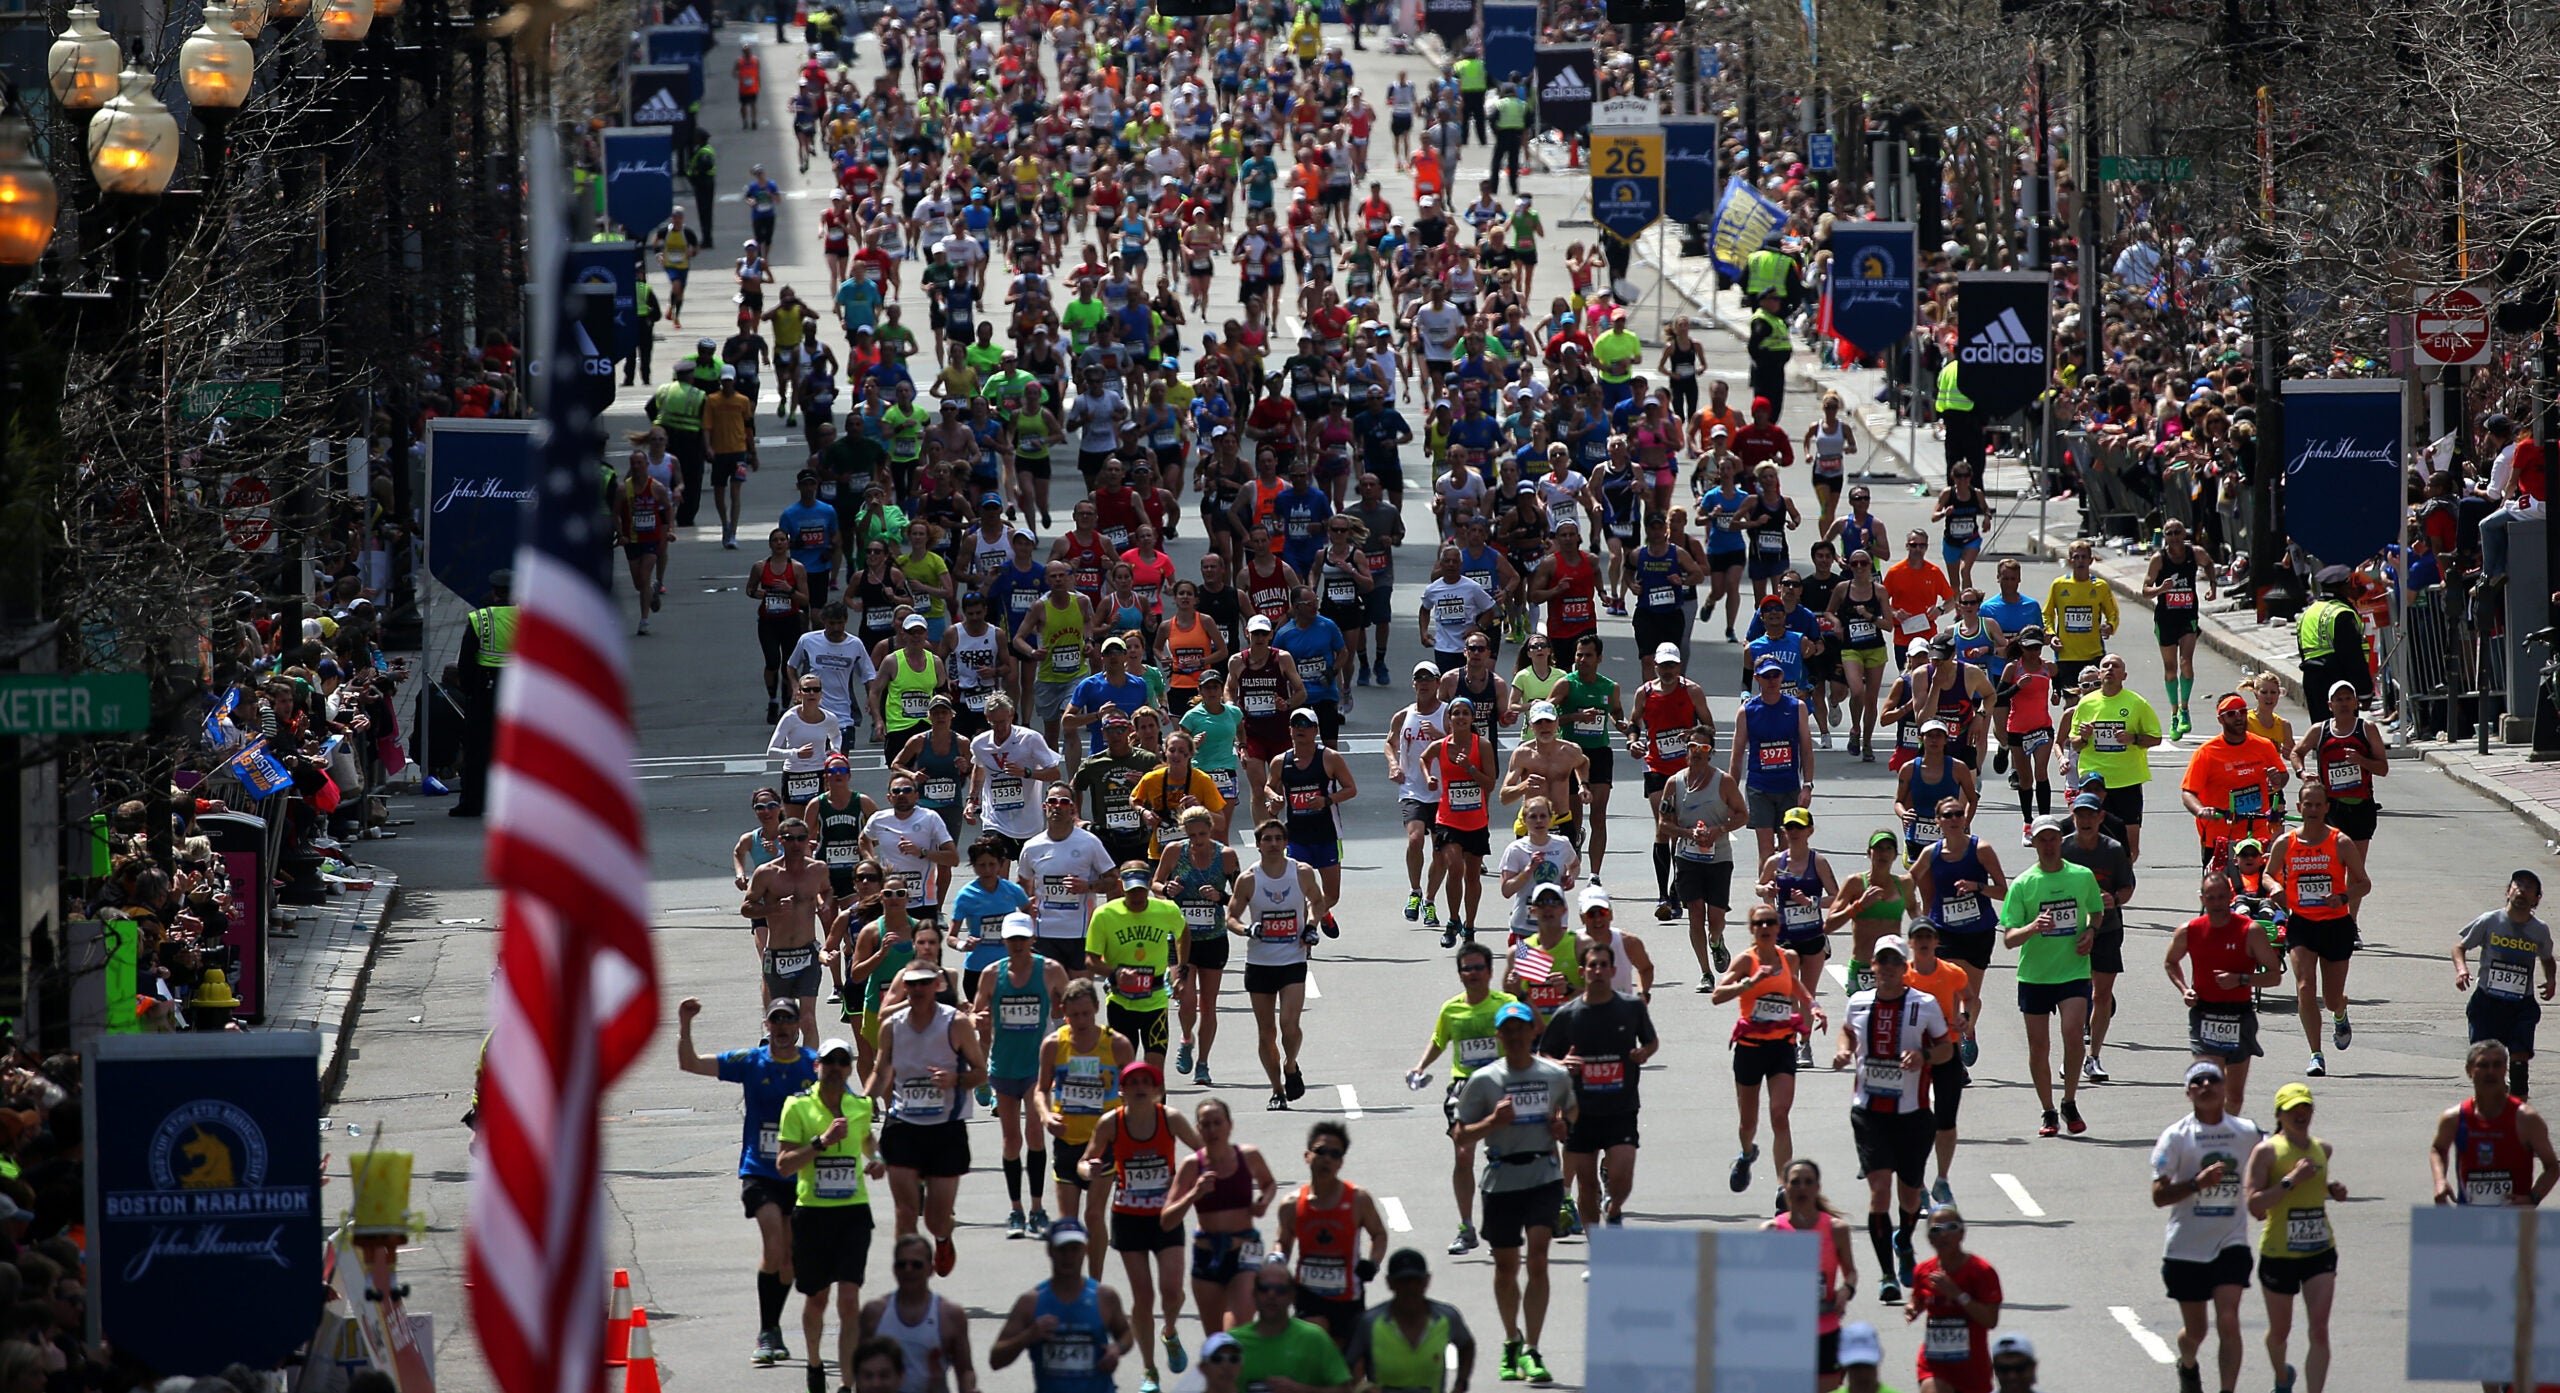 How to find a runner after they’ve crossed the Boston Marathon finish line